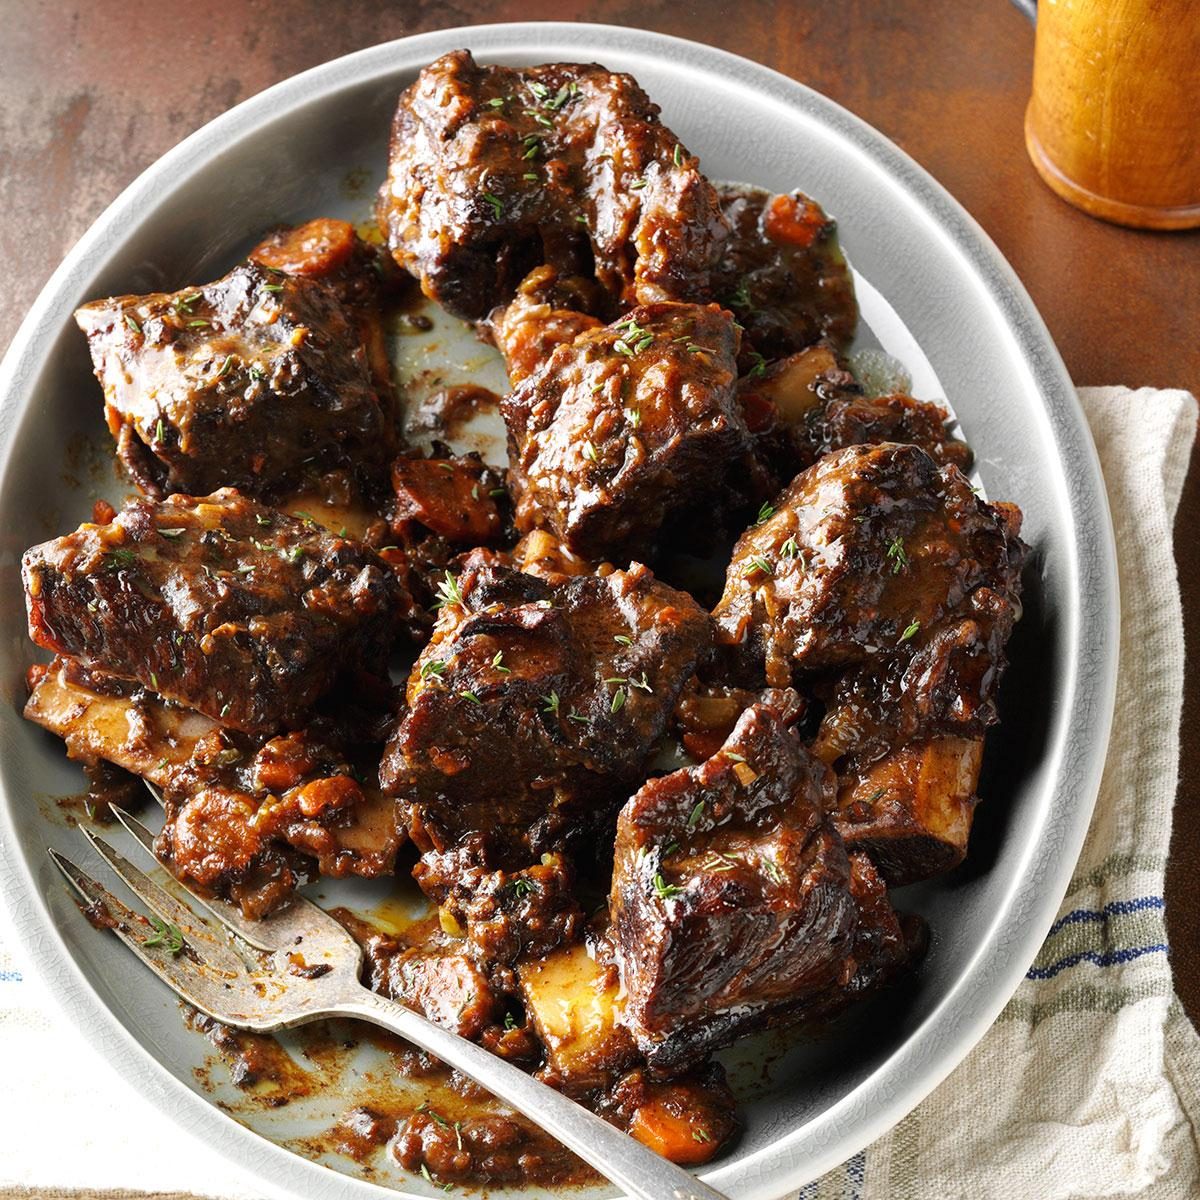 Day 26: Beef Short Ribs in Burgundy Sauce